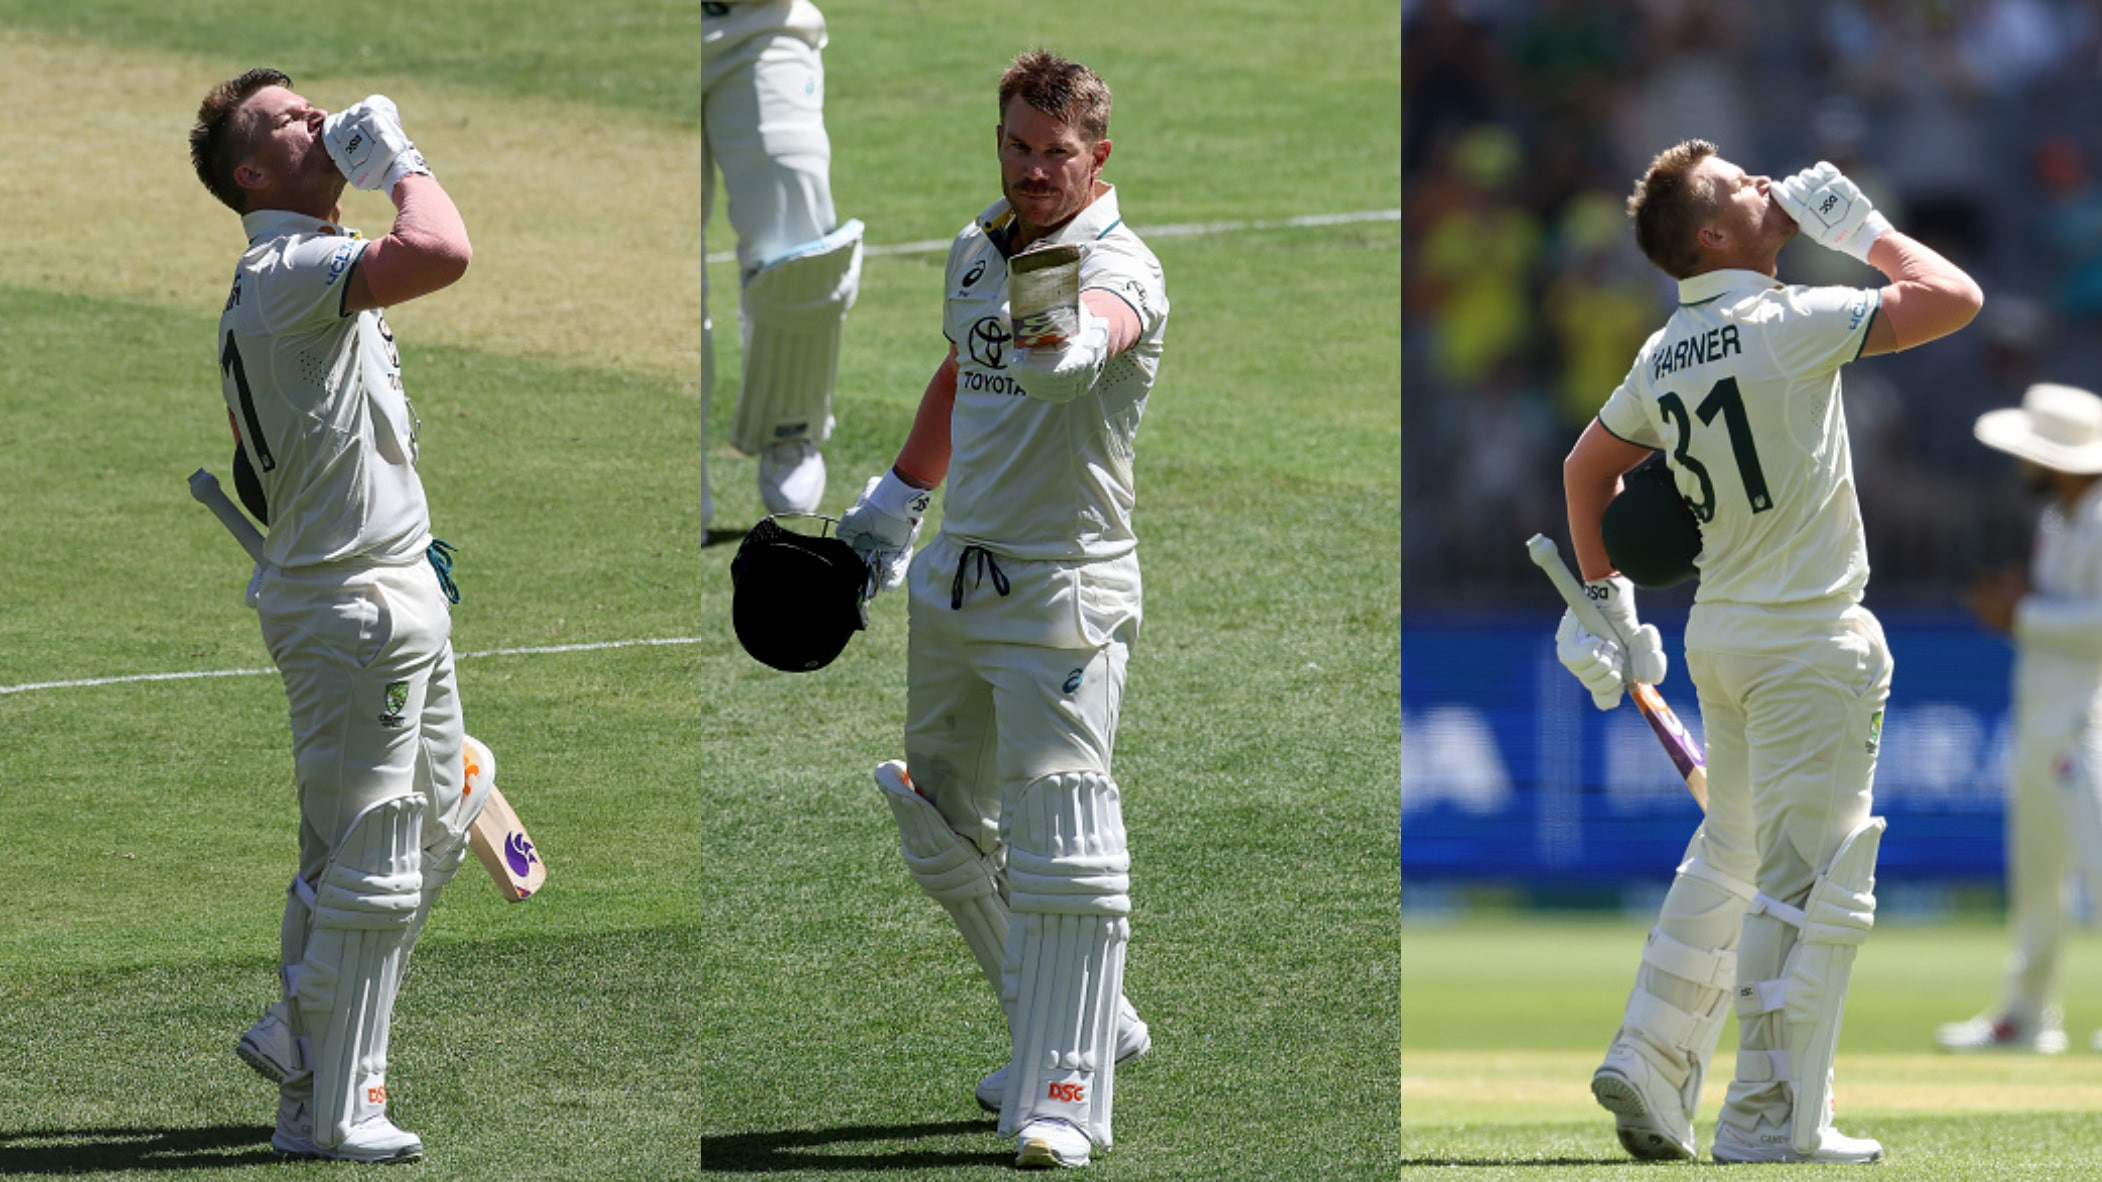 AUS v PAK 2023-24: “No better way to silence the critics...- David Warner after scoring ton on day 1 of Perth Test